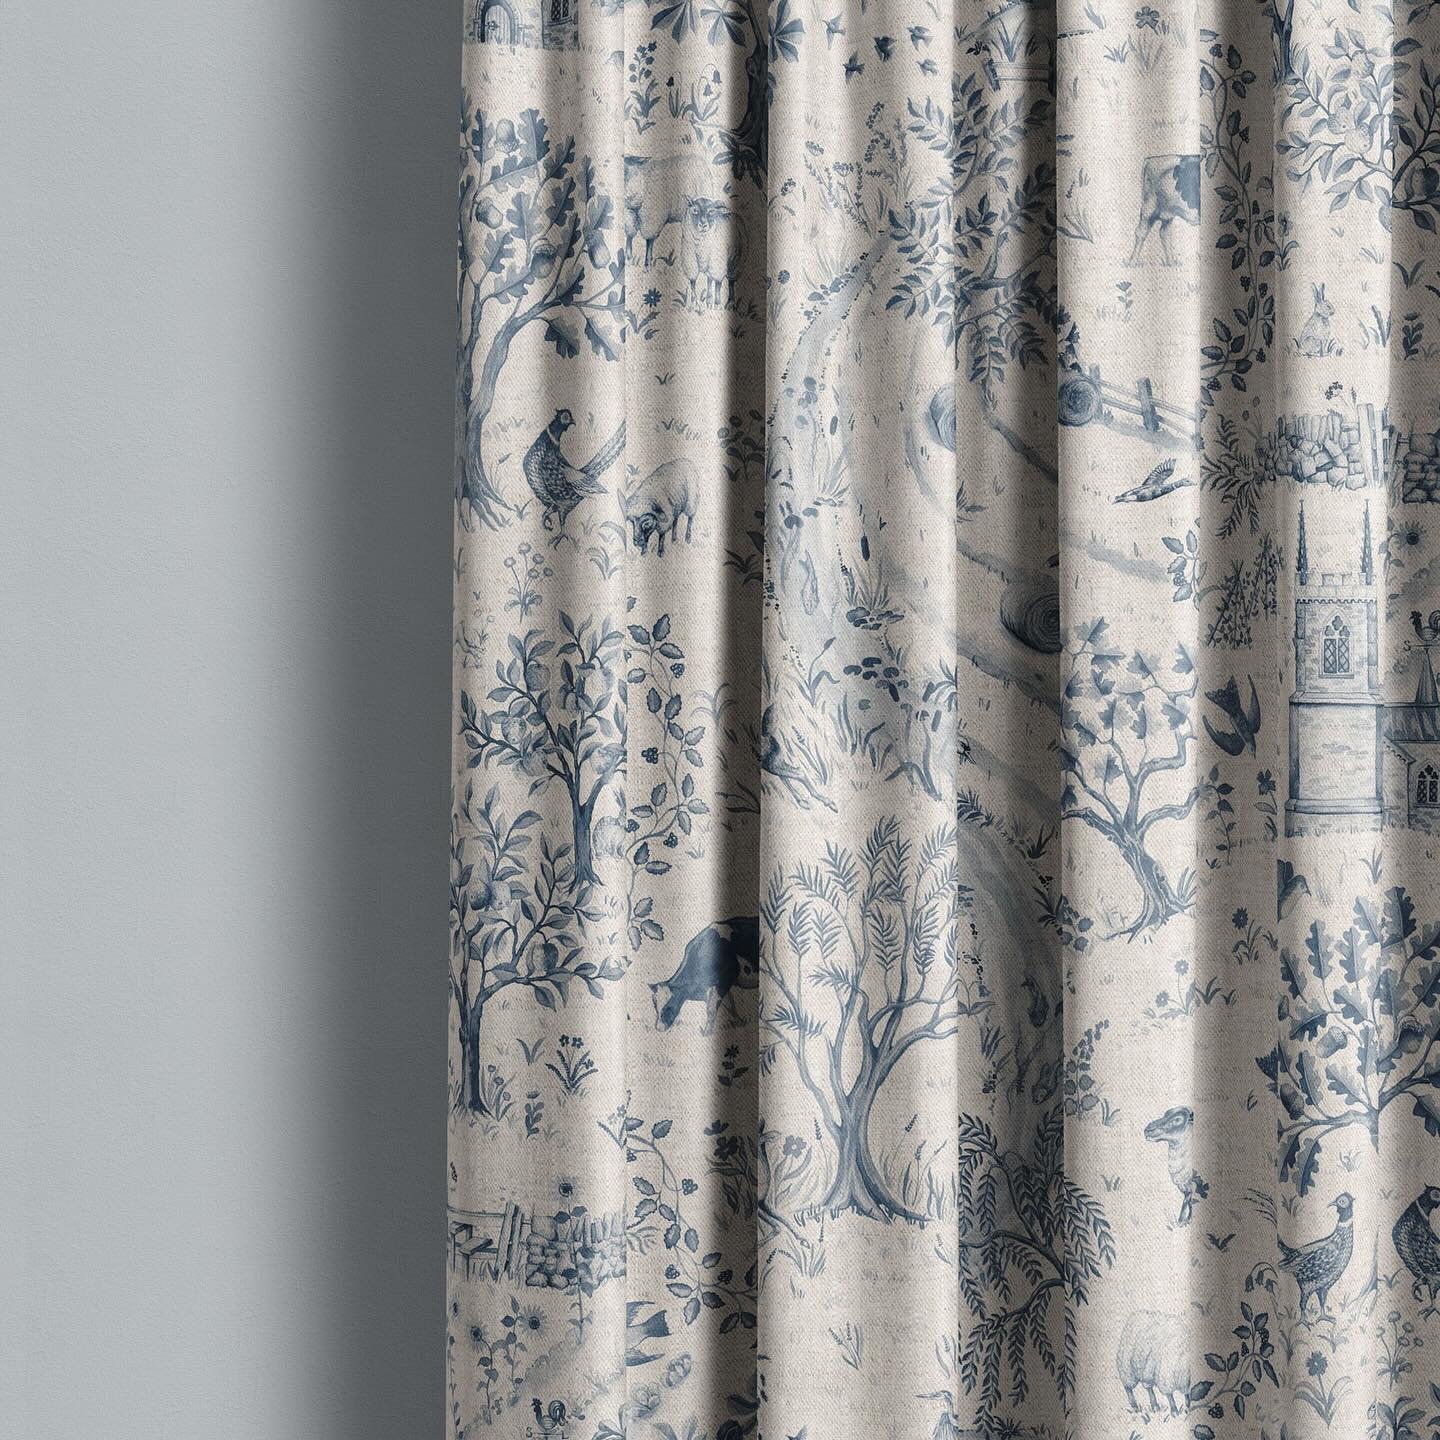 This week you&rsquo;ll notice on my website that I&rsquo;ve got a few more fabrics available to purchase! 🙌

Daily Walk proved very popular at the recent trade shows, and a favourite is the Delft Blue colourway on the natural unbleached 100% linen. 